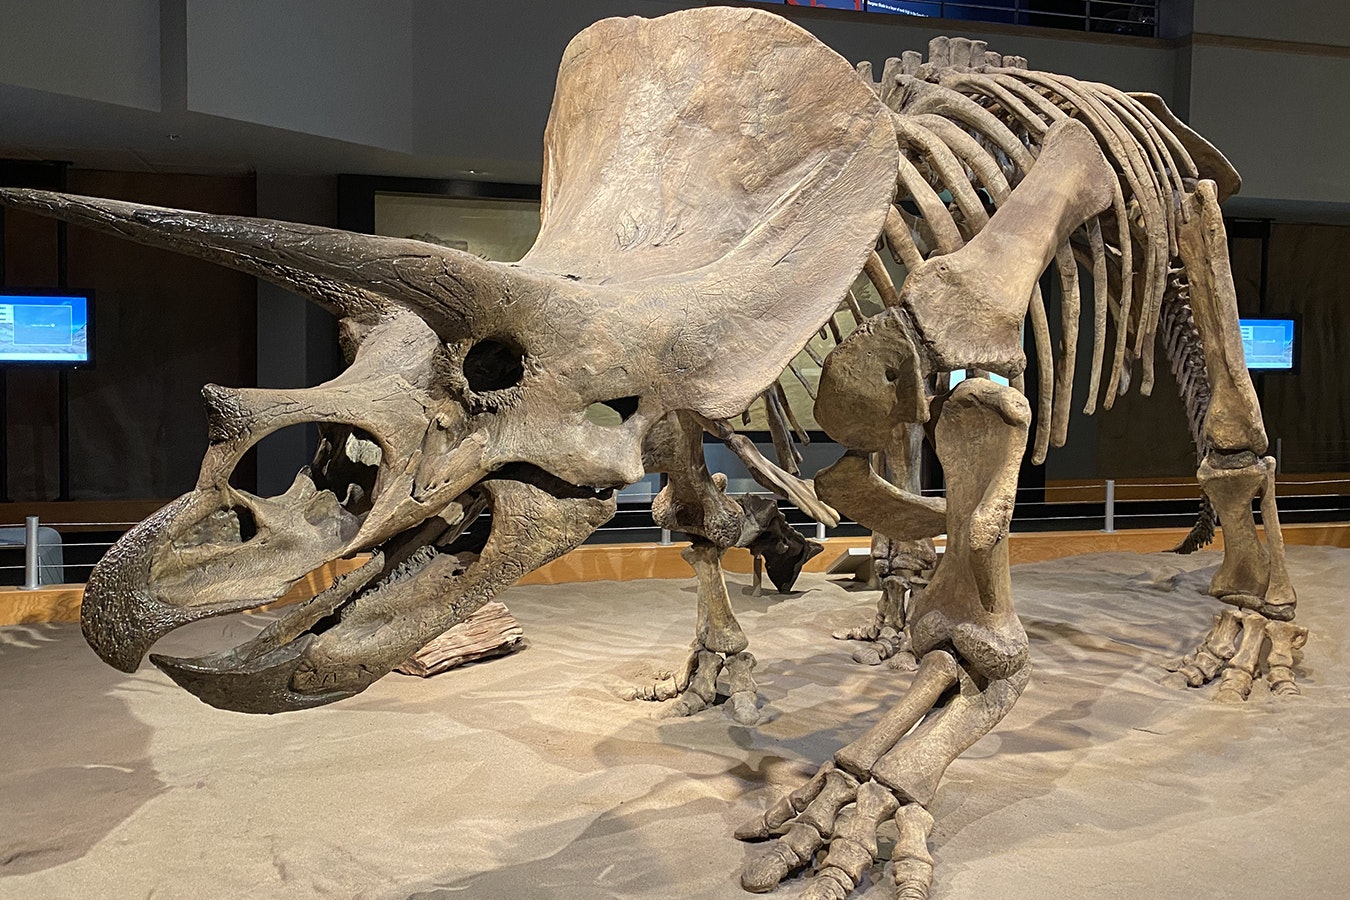 A Triceratops skeleton in the Royal Tyrrell Museum of Paleontology in Alberta, Canada. This is a replica of the Triceratops skeleton in the American Museum of Natural History in New York City. The skull was found in Niobrara County in 1909.